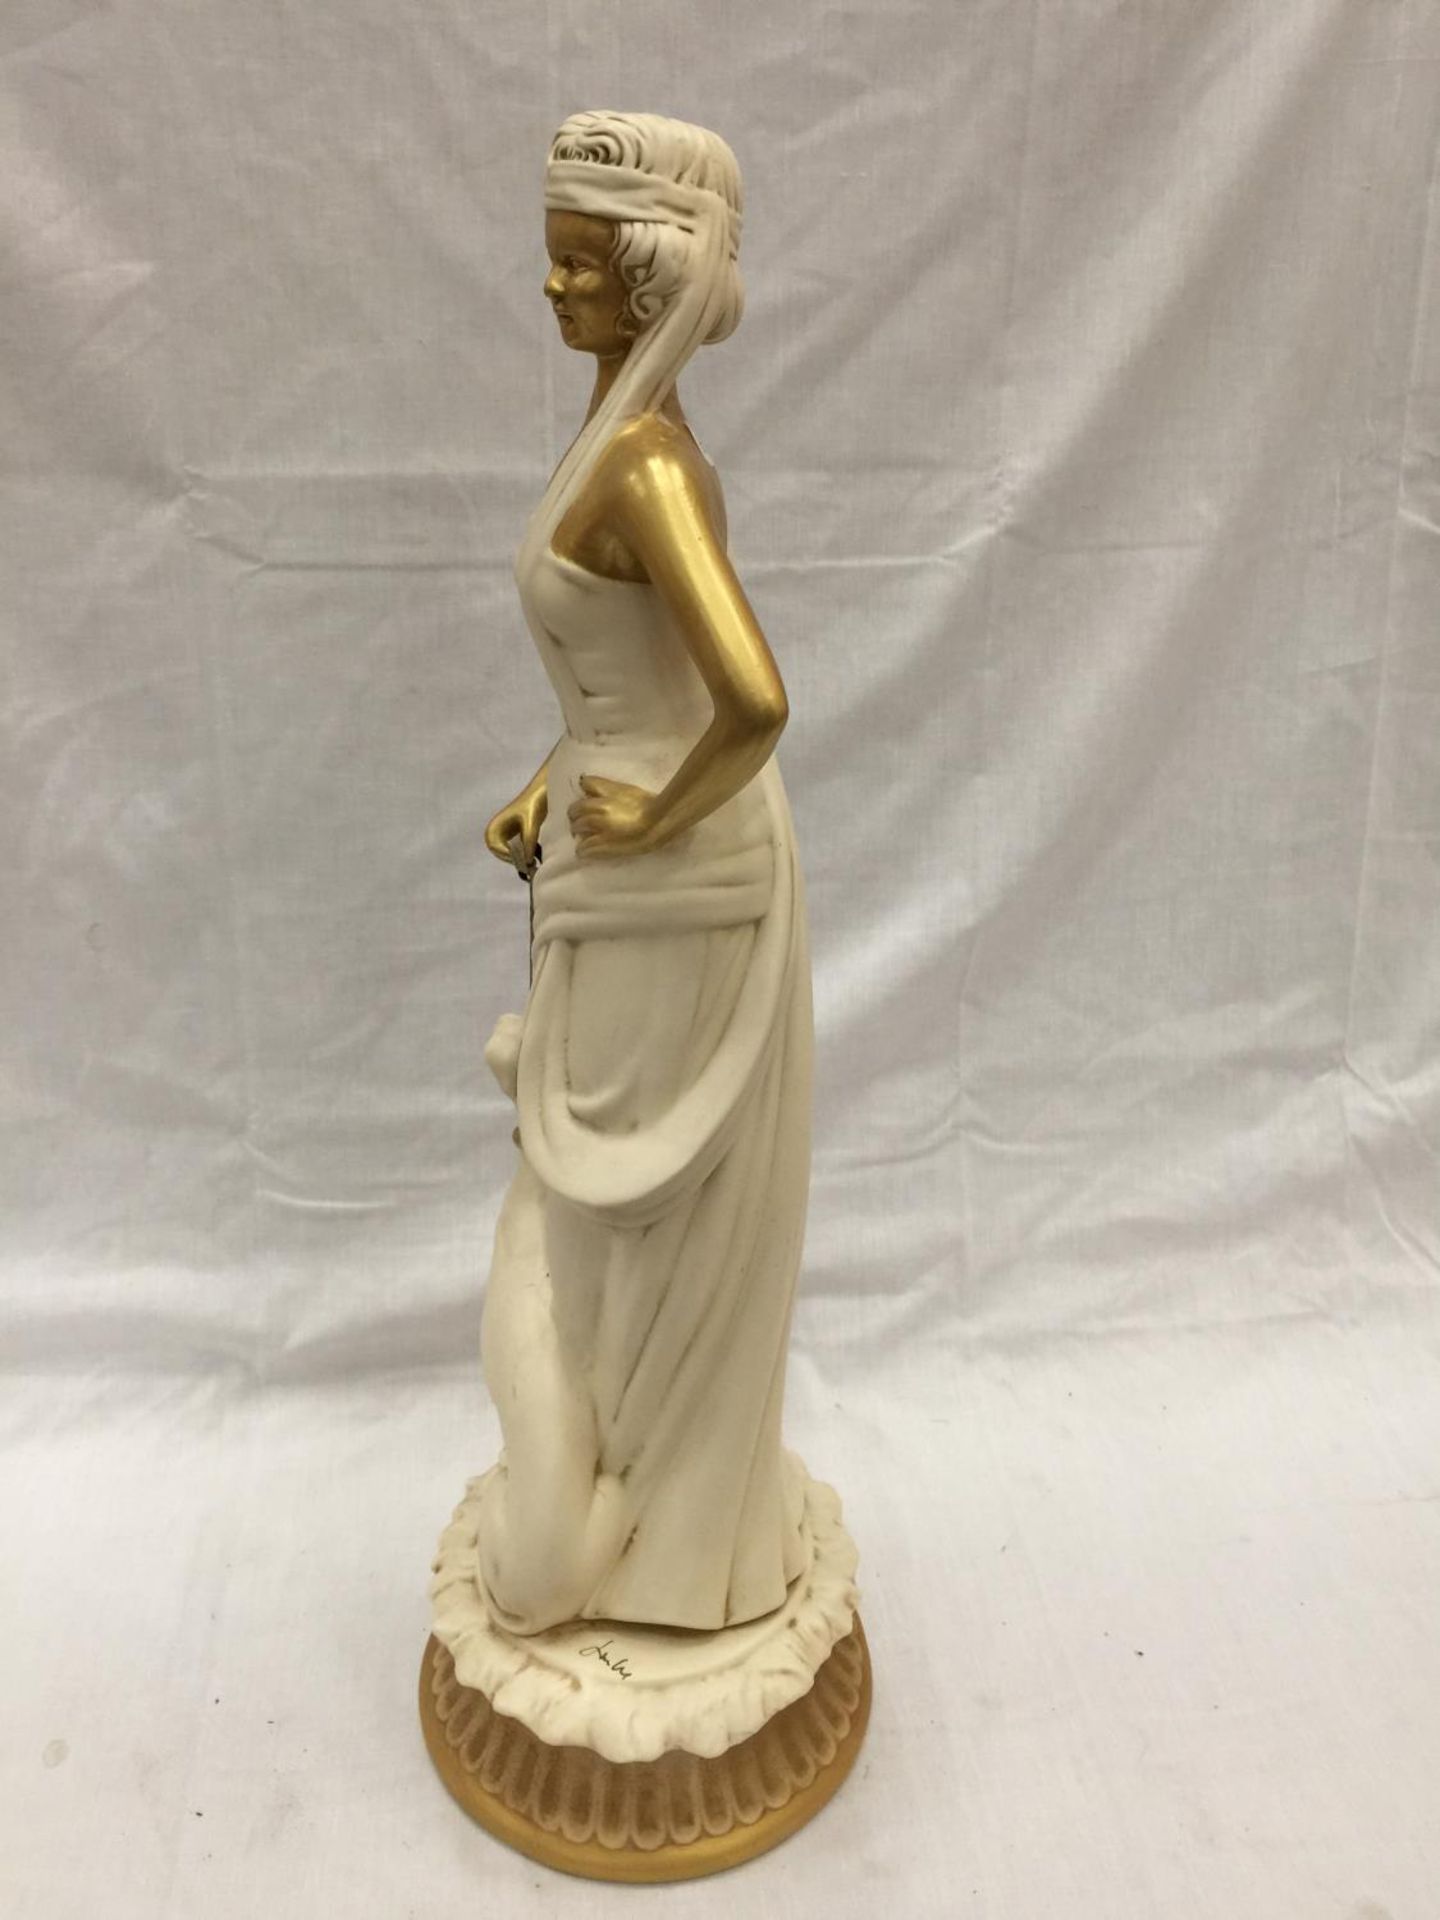 A FLOOR STANDING ART DECO STYLE FIGURE HEIGHT APPROX 72CM, SIGNATURE TO BASE - Image 4 of 5